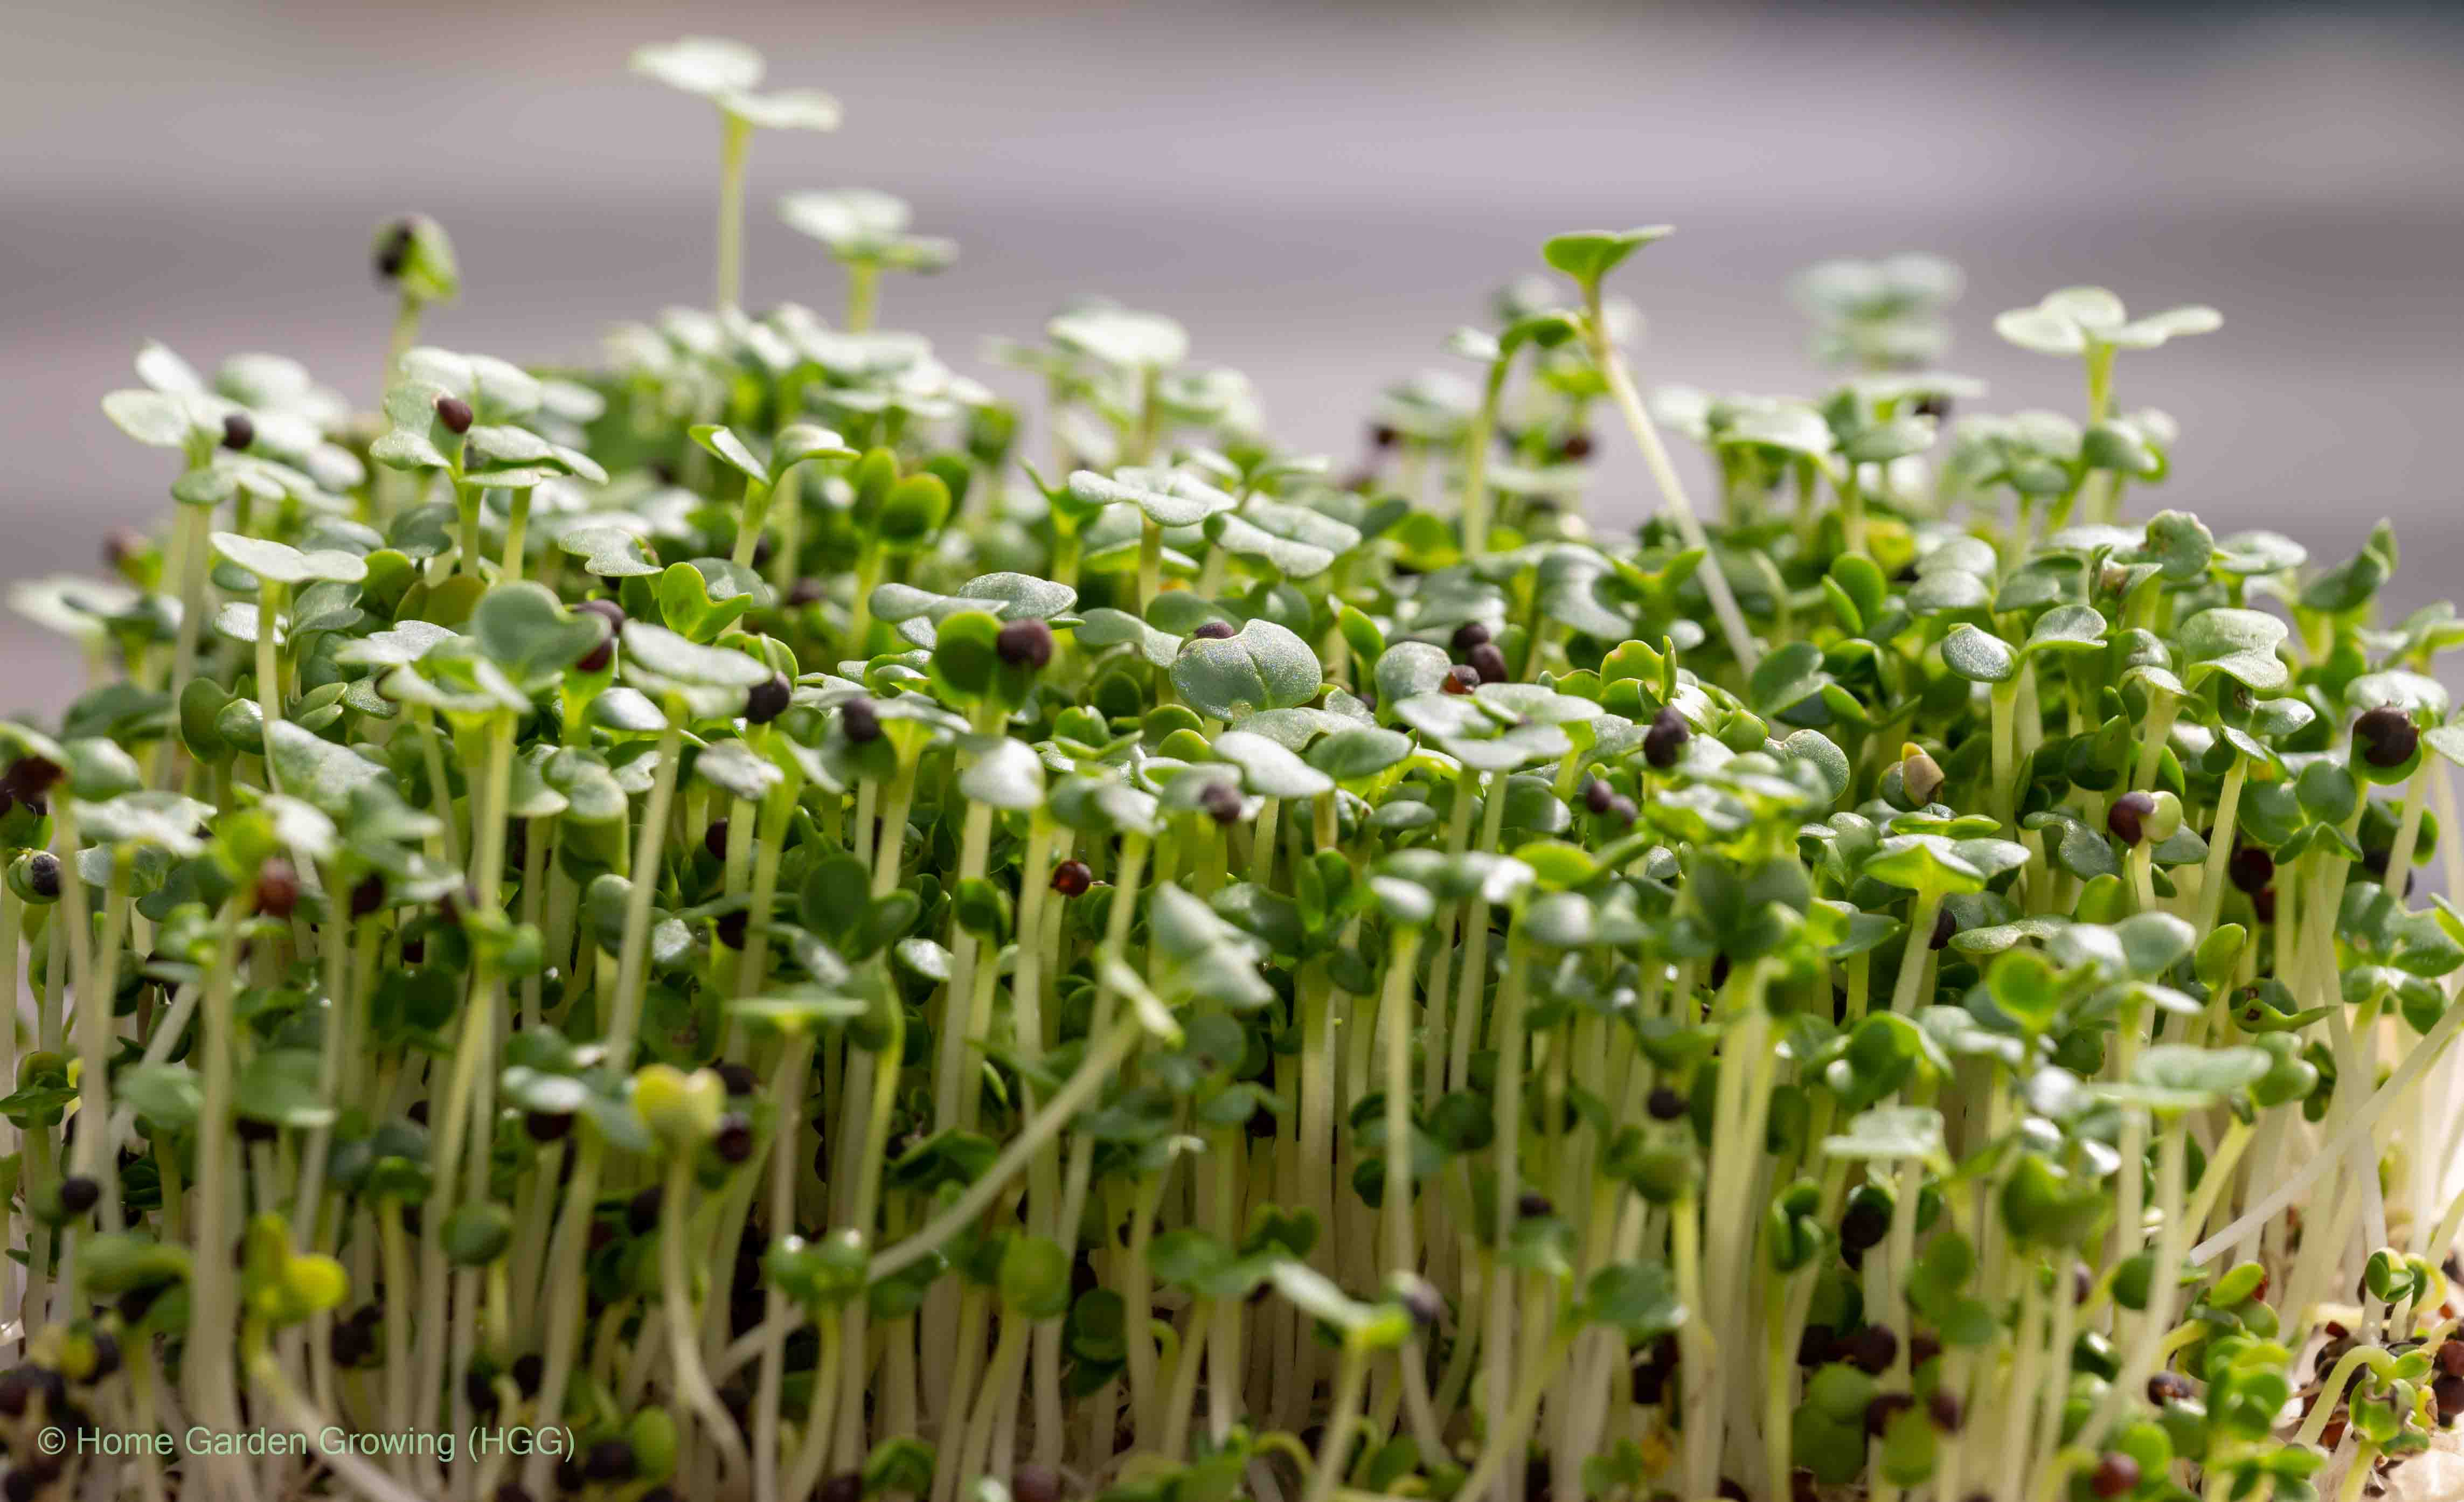 Cover Image for Introduction to Microgreens: What are they and why are they popular?